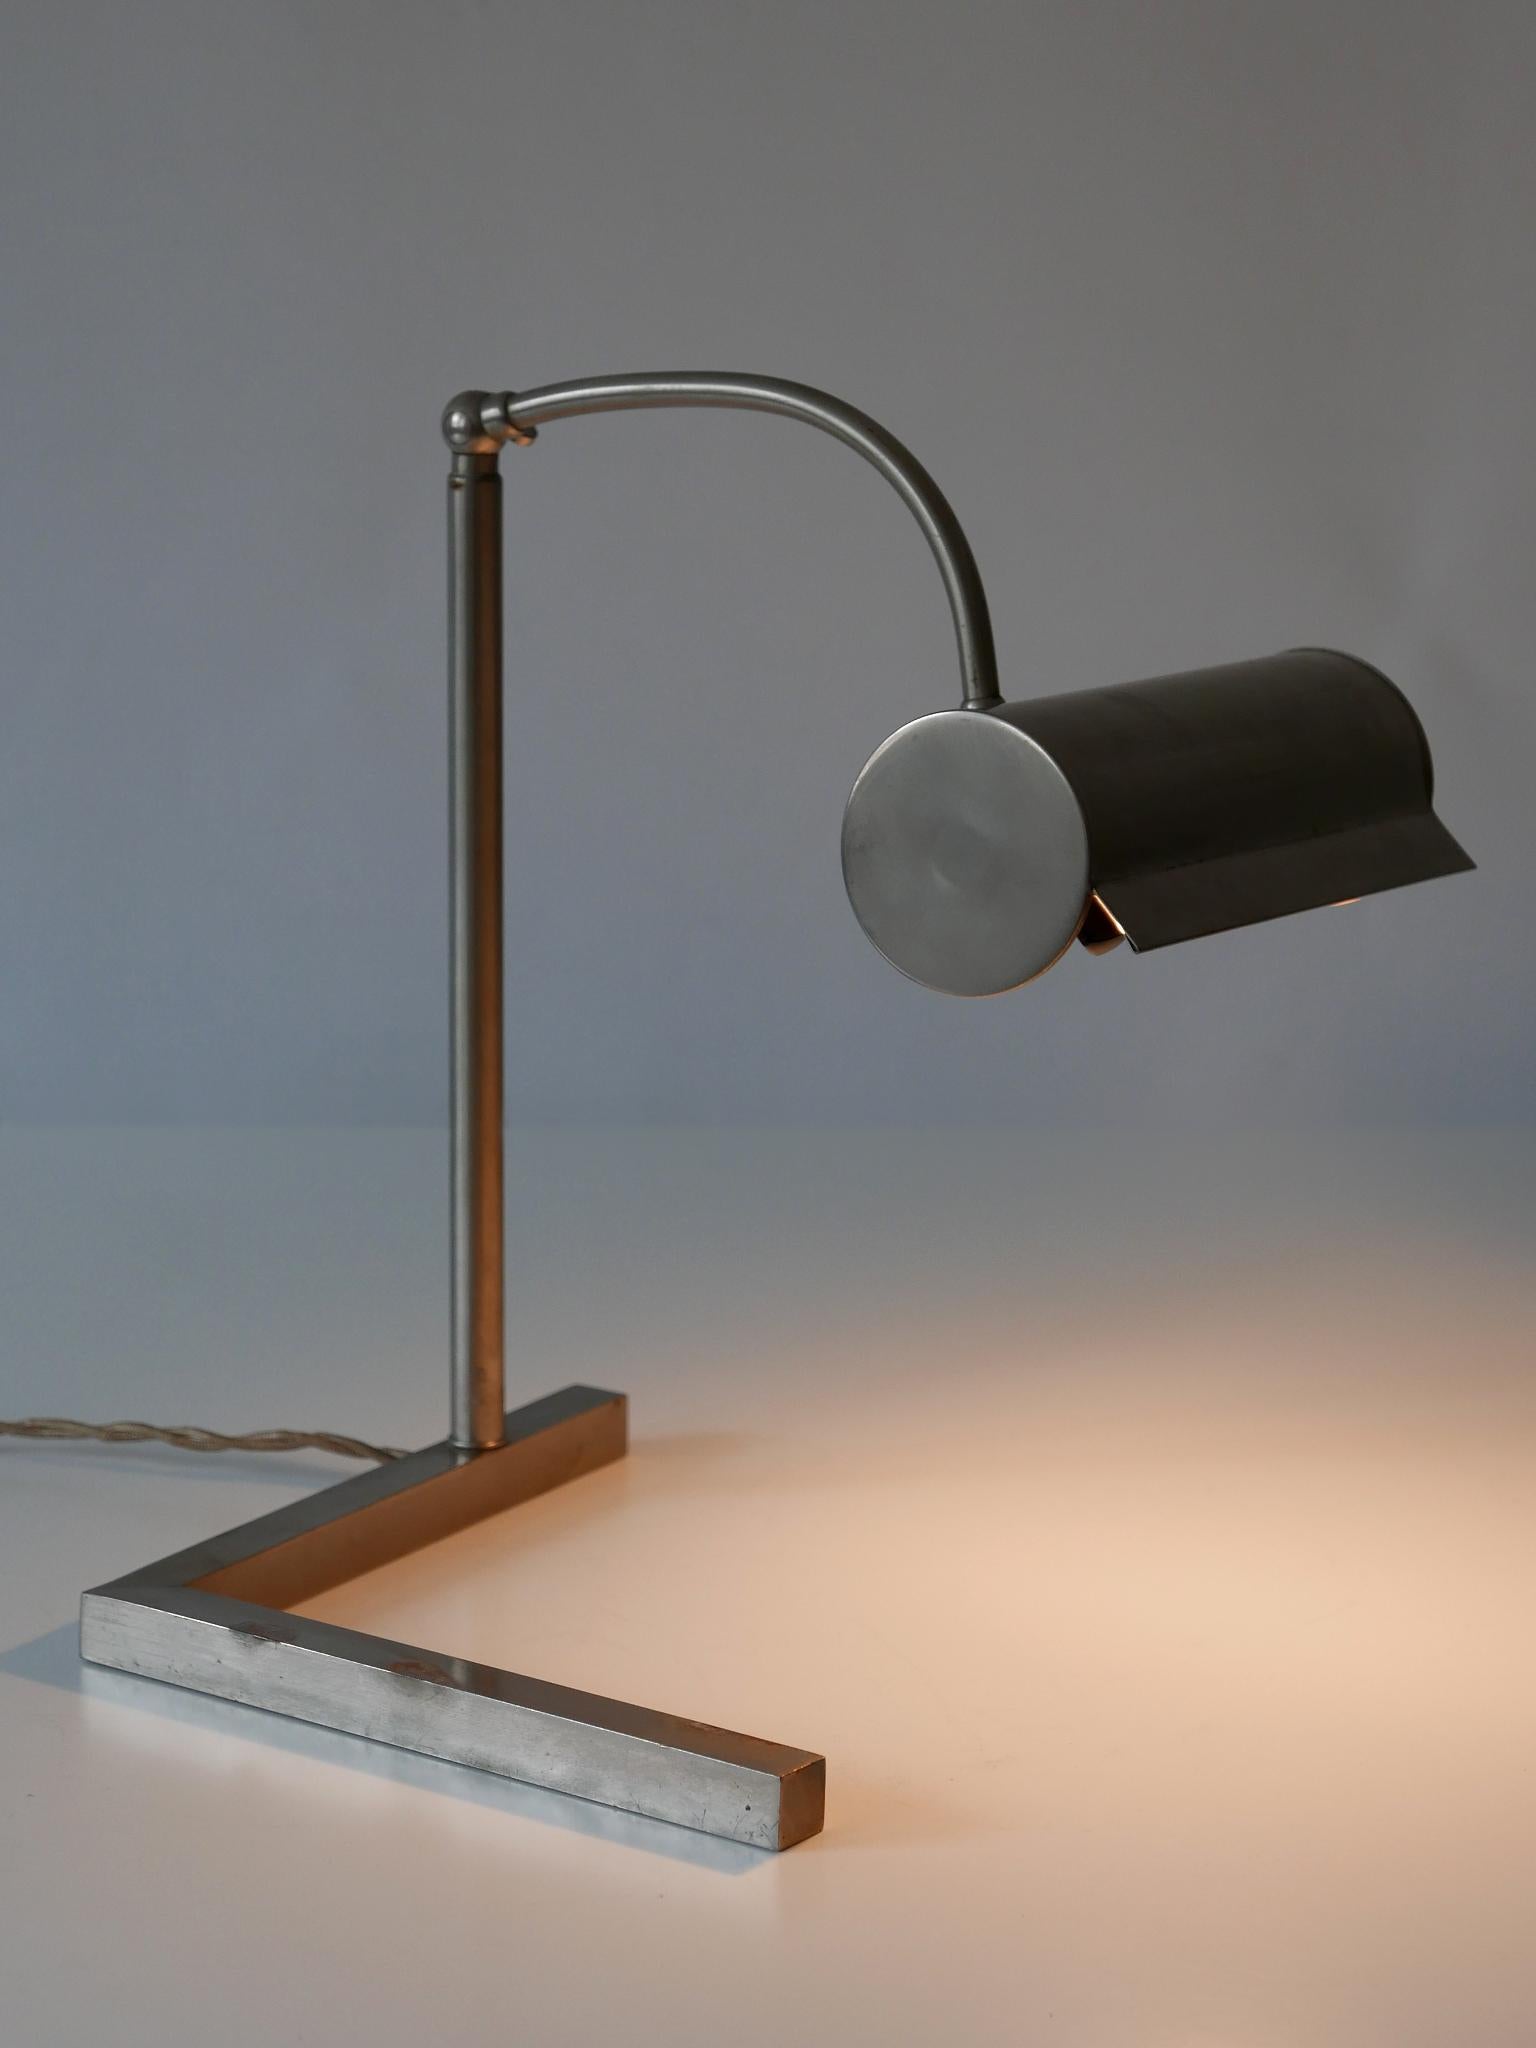 Exceptional, minimalistic Bauhaus / Modernist table lamp or desk light with adjustable height and shade. Designed probably by Jacobus Johannes Pieter Oud for W. H. Gispen, 1920s, Rotterdam. 

Executed in nickel-plated brass, the table lamp needs 1